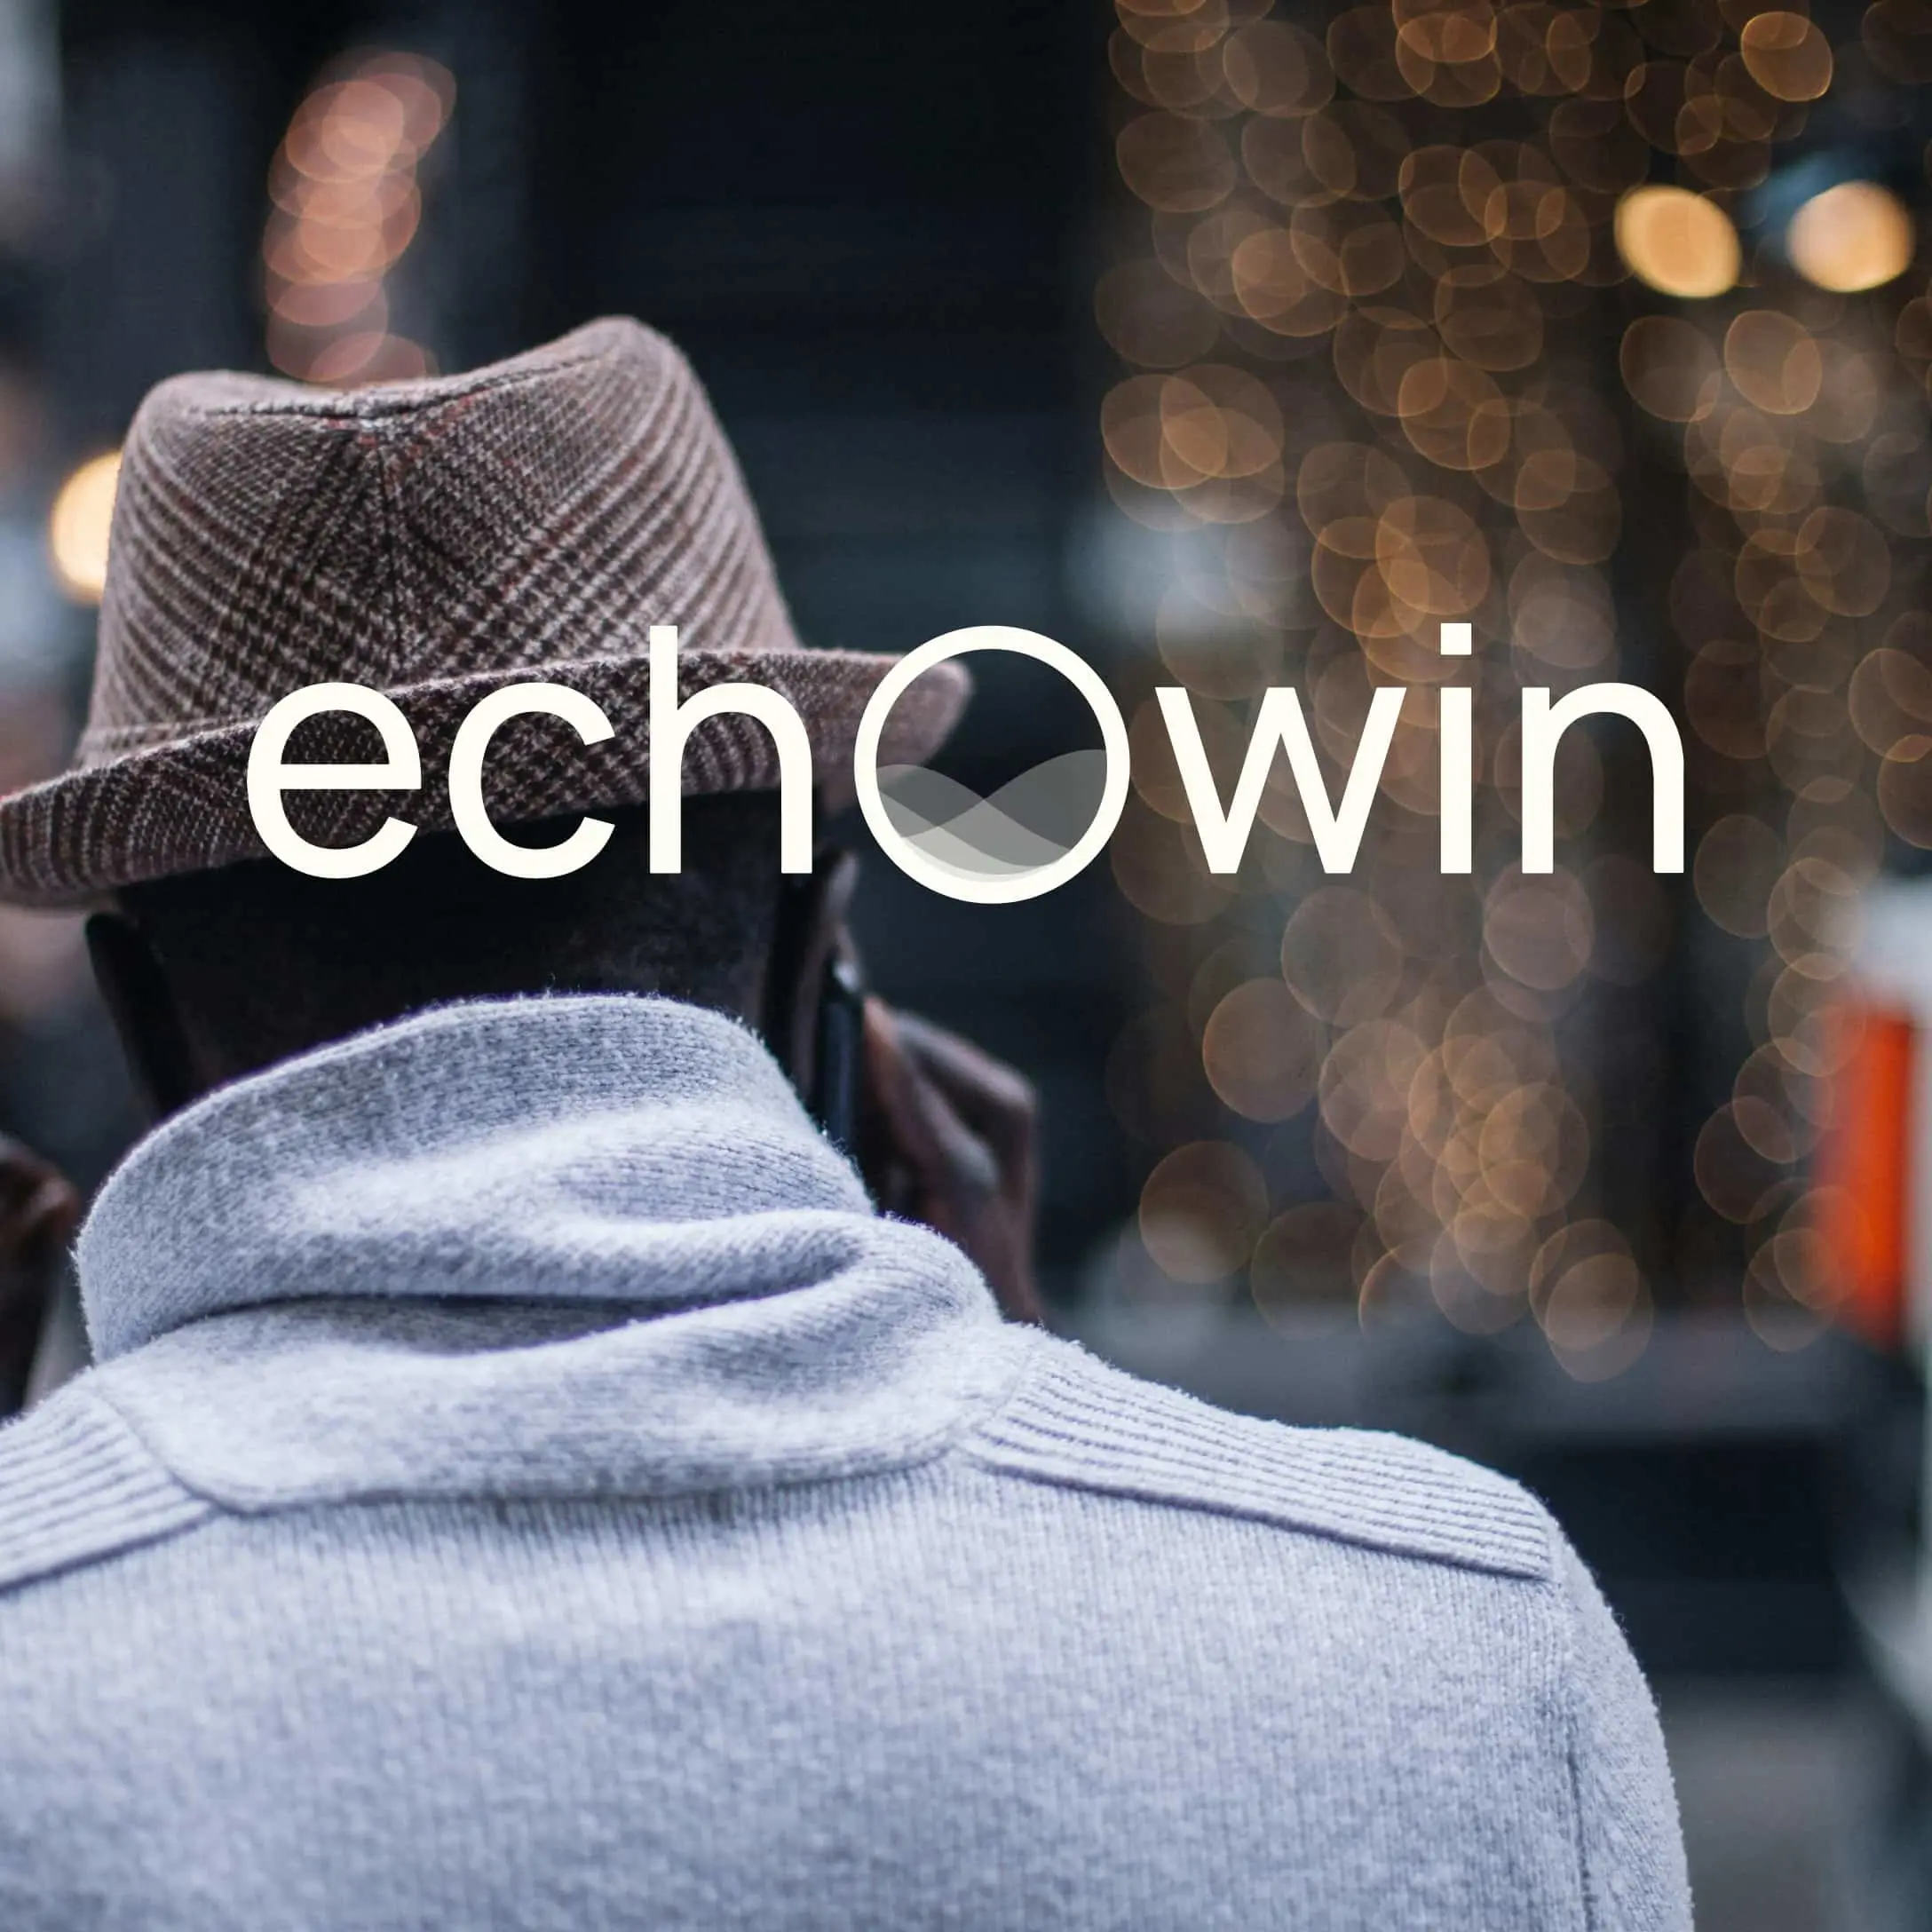 echowin logo and man in a hat talking on his cell phone